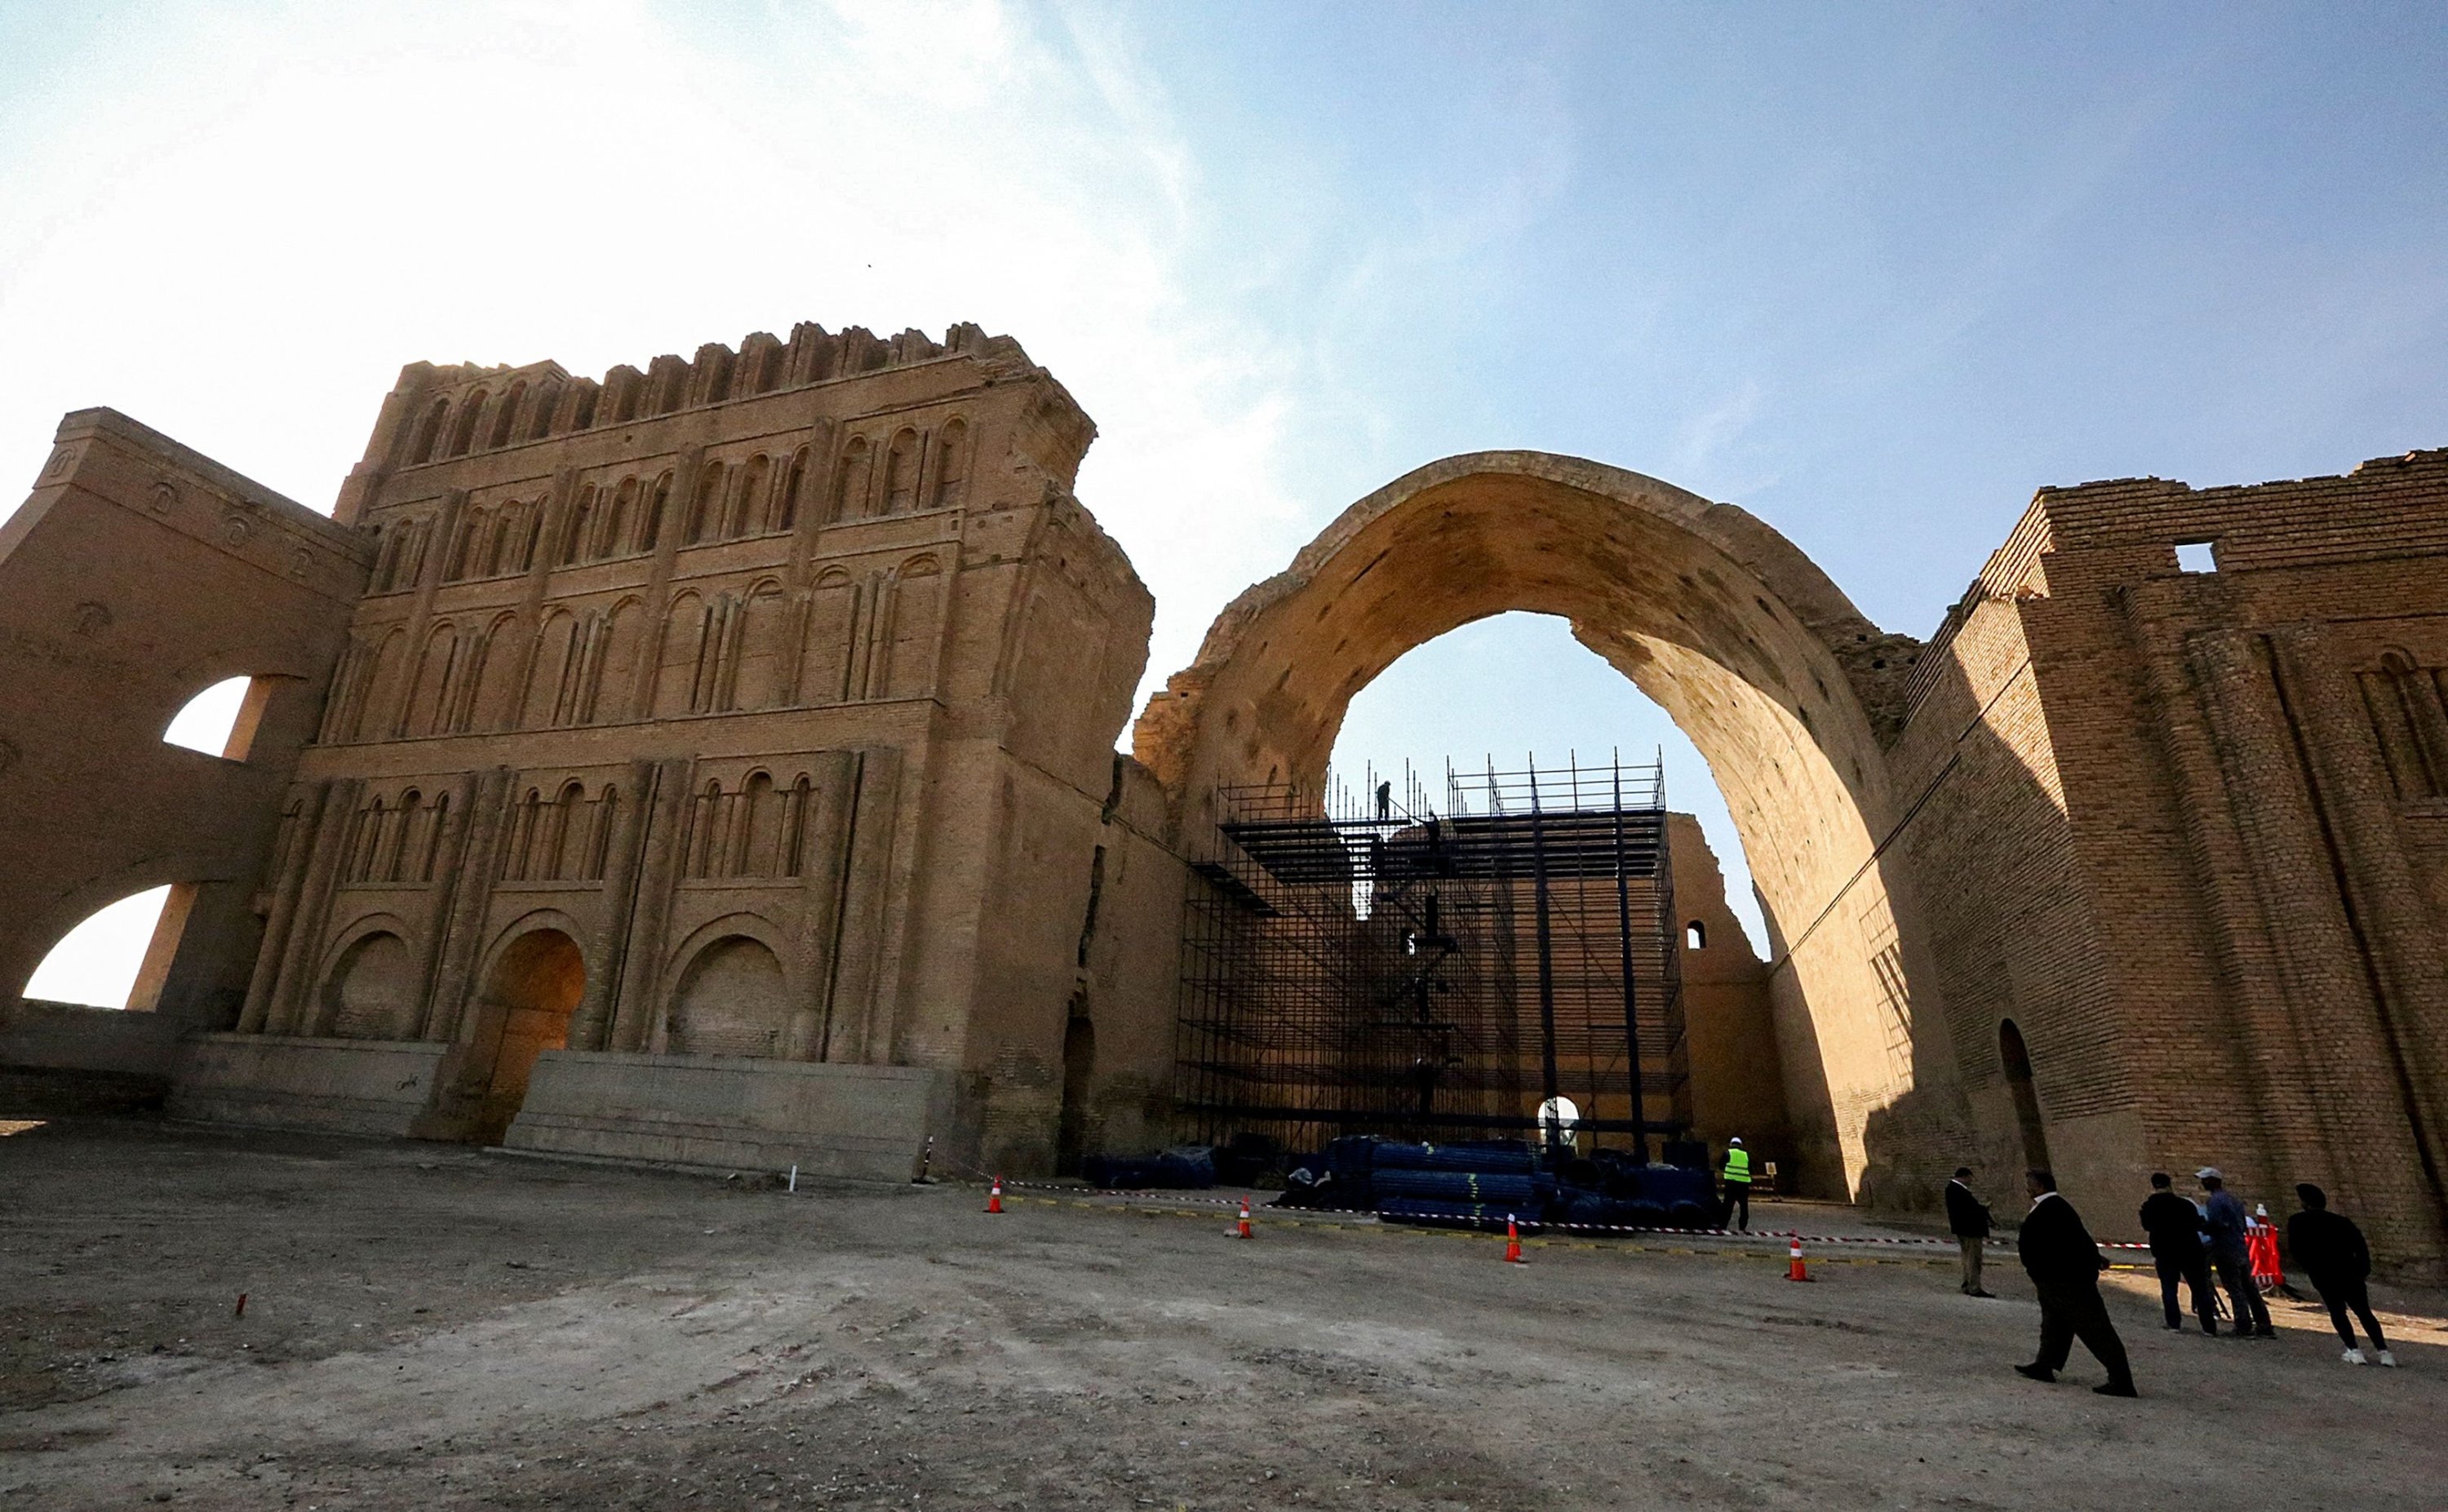 General view of the Arch of Ctesiphon, also known as Taq Kisra (Arch of Khosrow), in front of the curatorial scaffolding at the ancient site of Ctesiphon near al-Madain in central Iraq, November 24, 2021 (AFP Photo)